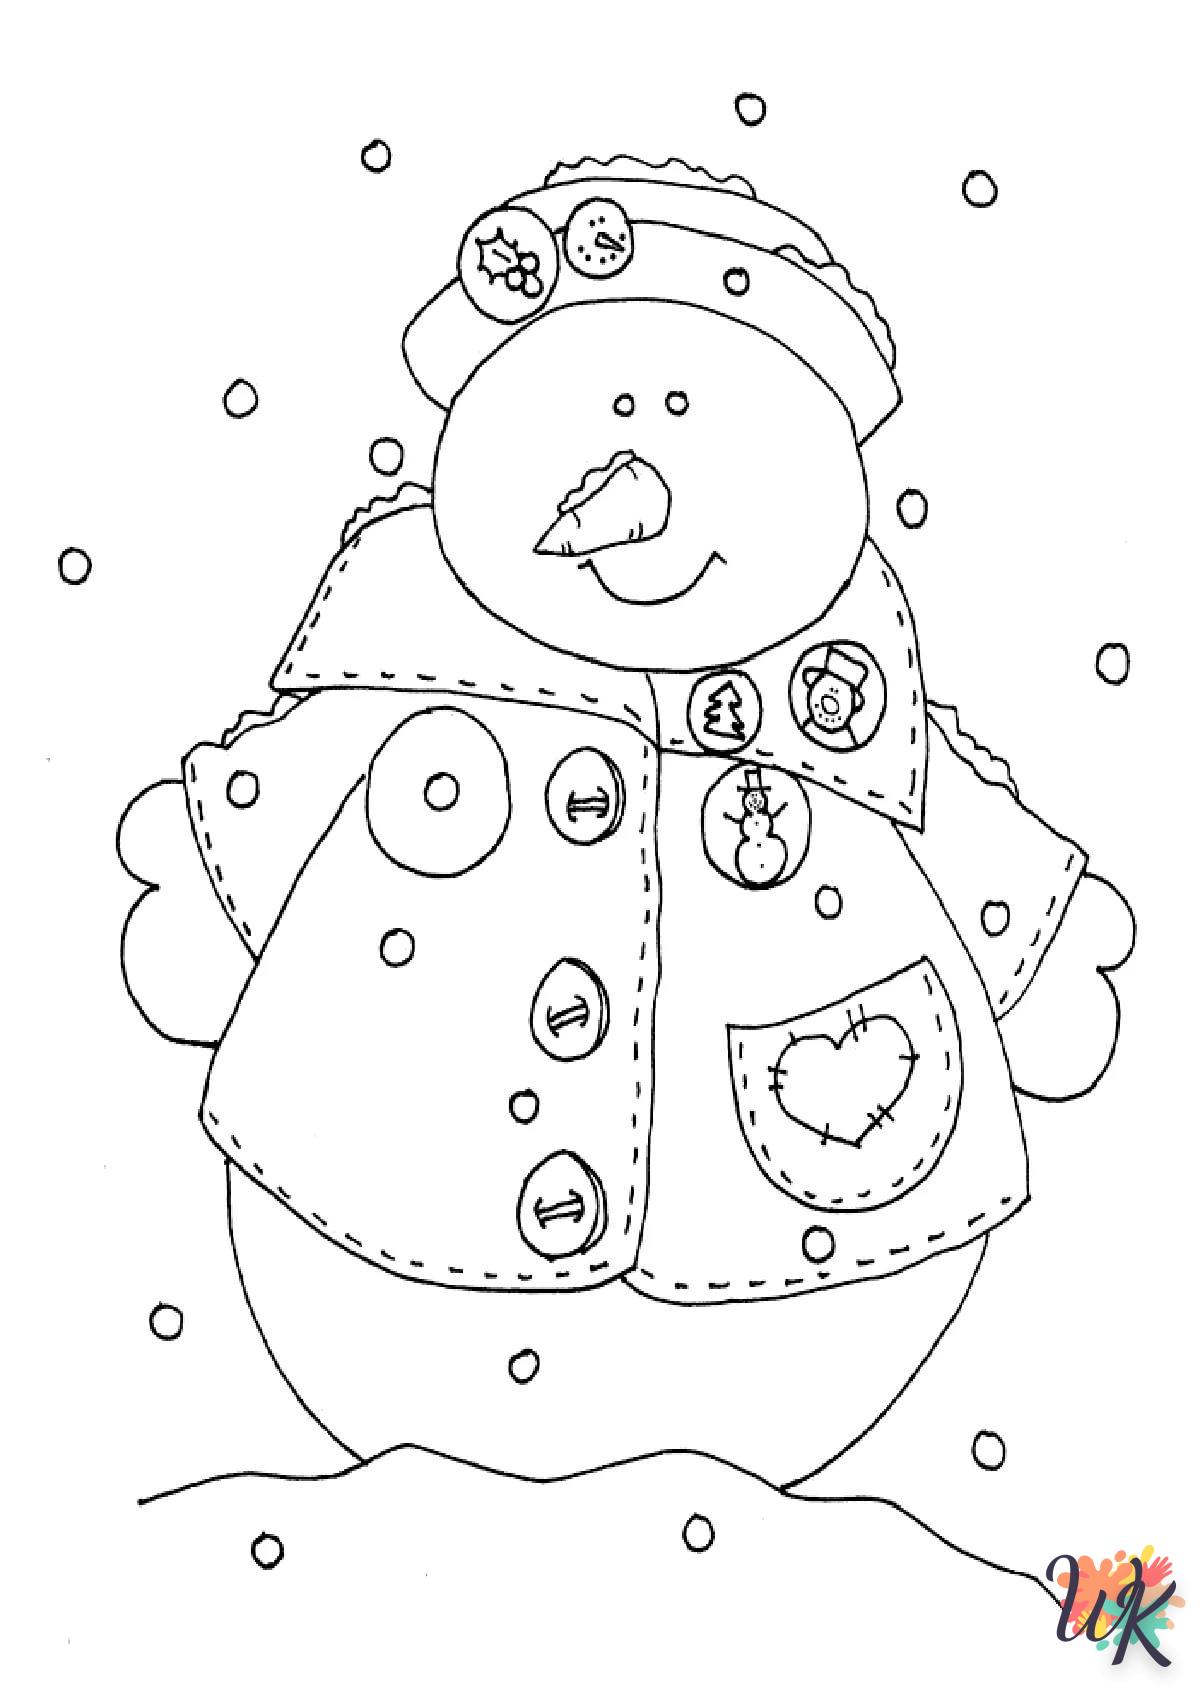 Snowman coloring page for children aged 8 to print